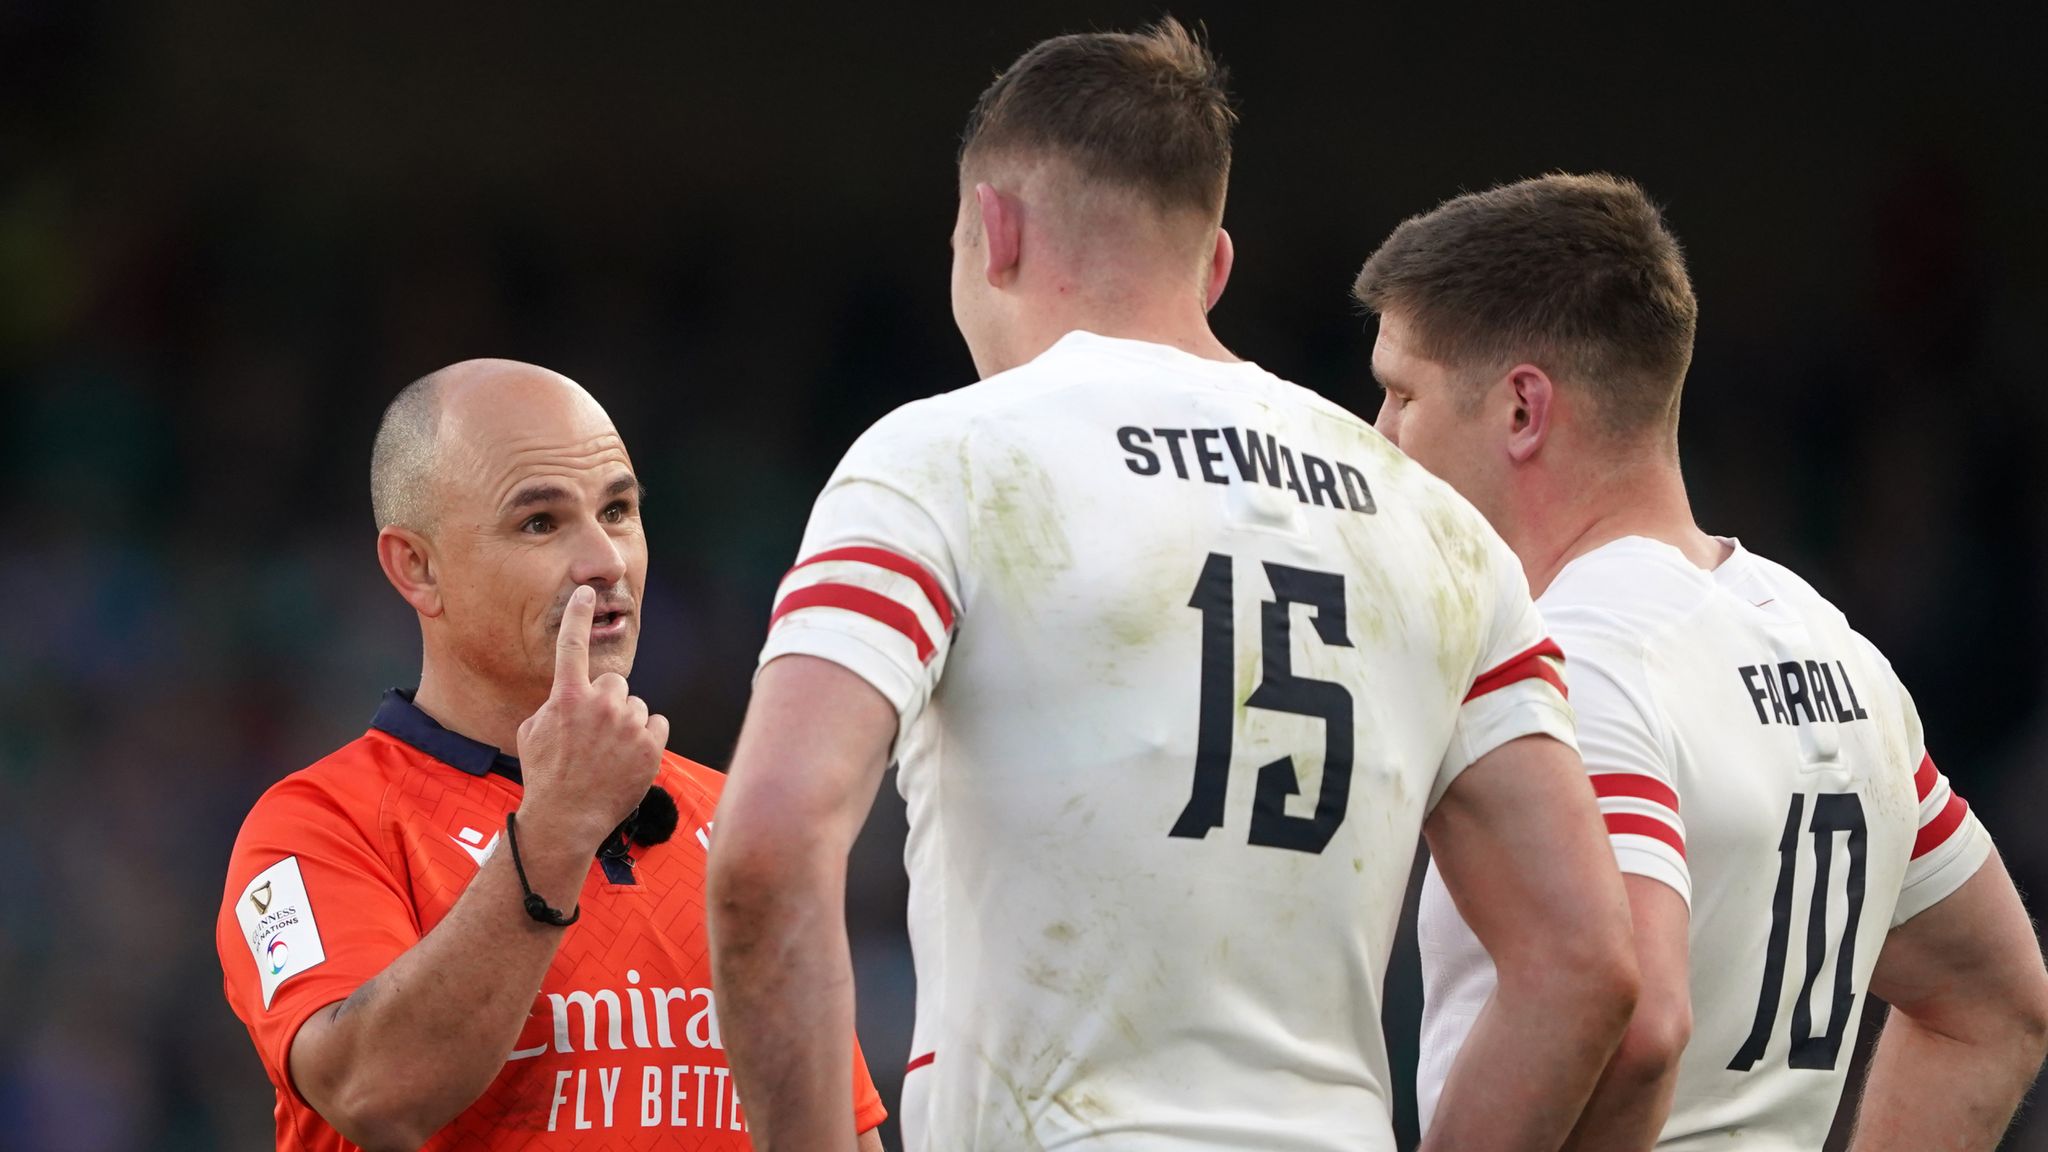 England full-back Freddie Stewards red card against Ireland in Six Nations rescinded Rugby Union News Sky Sports